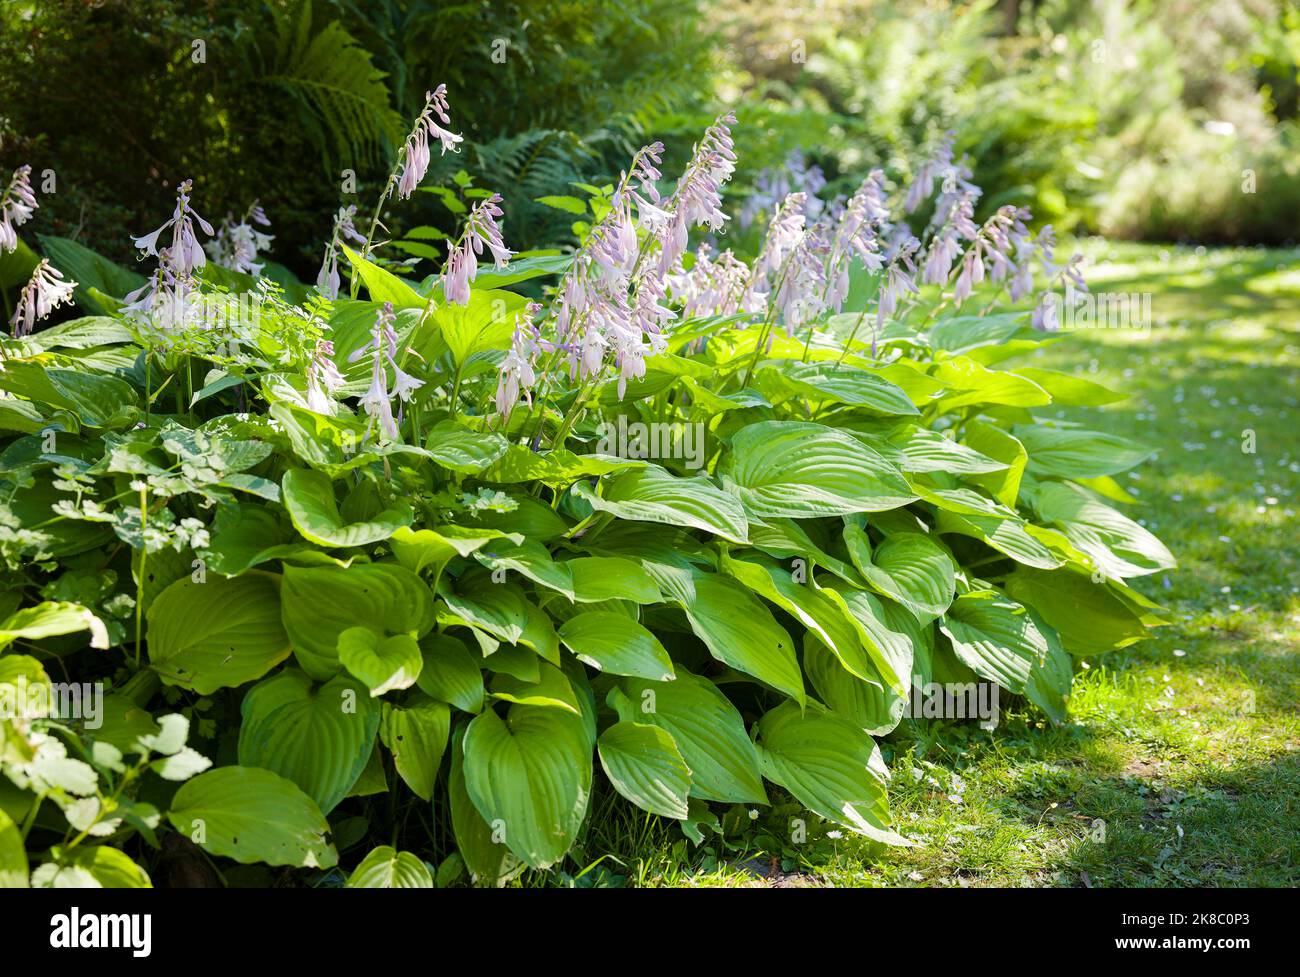 Hosta plants (plantain lily) with flowers. Shade tolerant plants in a UK garden in summer Stock Photo